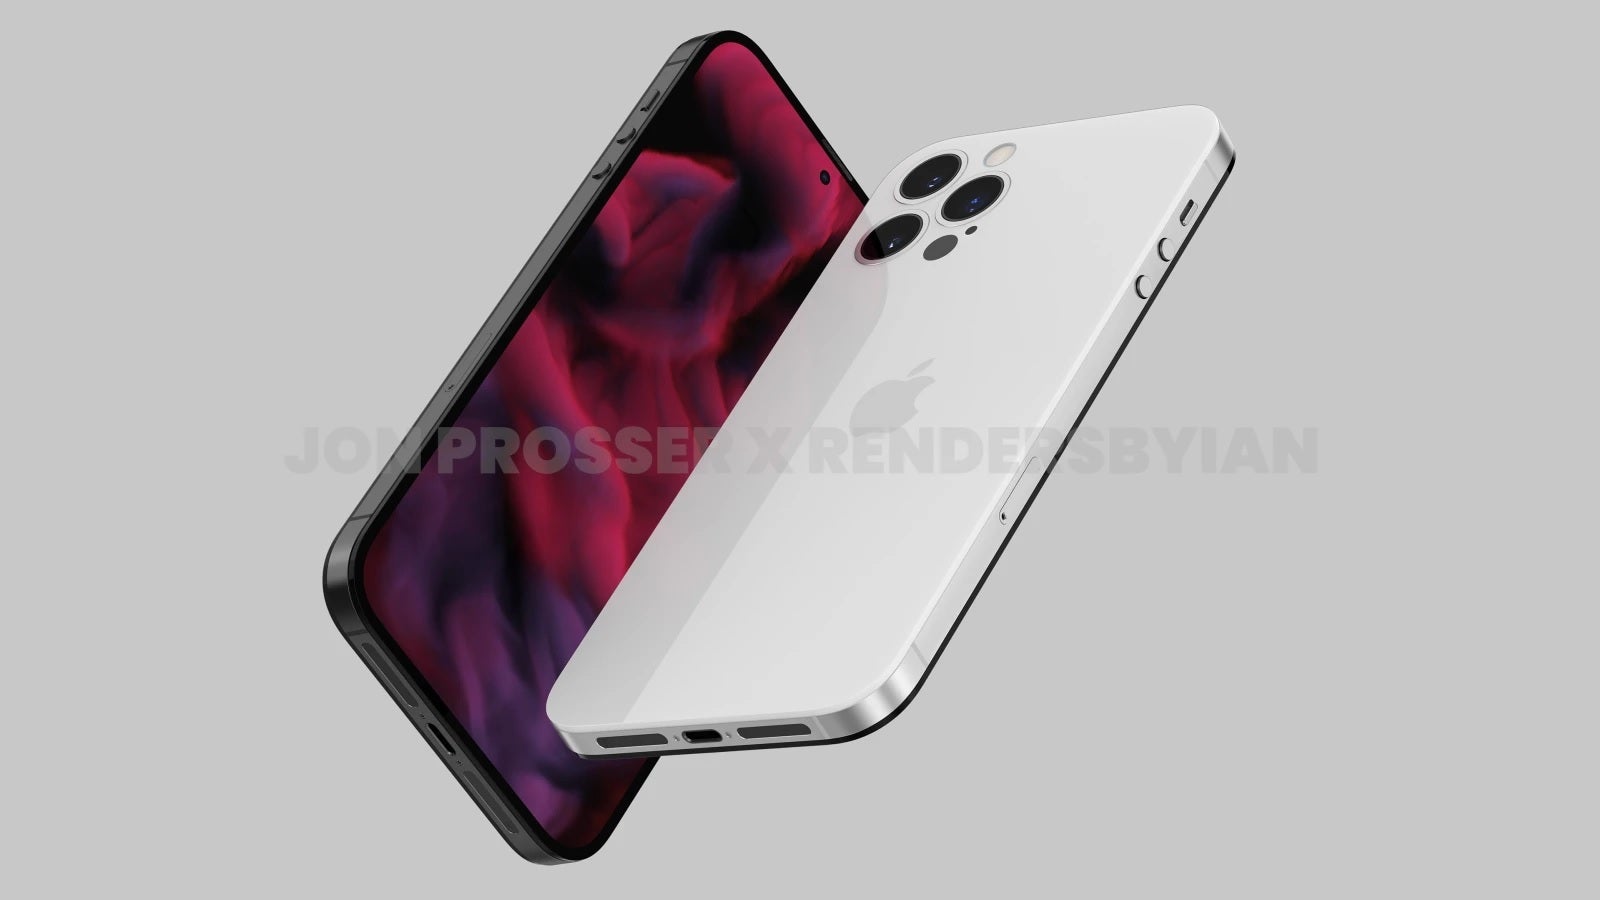 Render of the iPhone 14 Pro Max released by Twitter tipster Jon Prosser - Brand new iPhone 14 Pro 5G concept video resembles Twitter tipster&#039;s Pro Max render